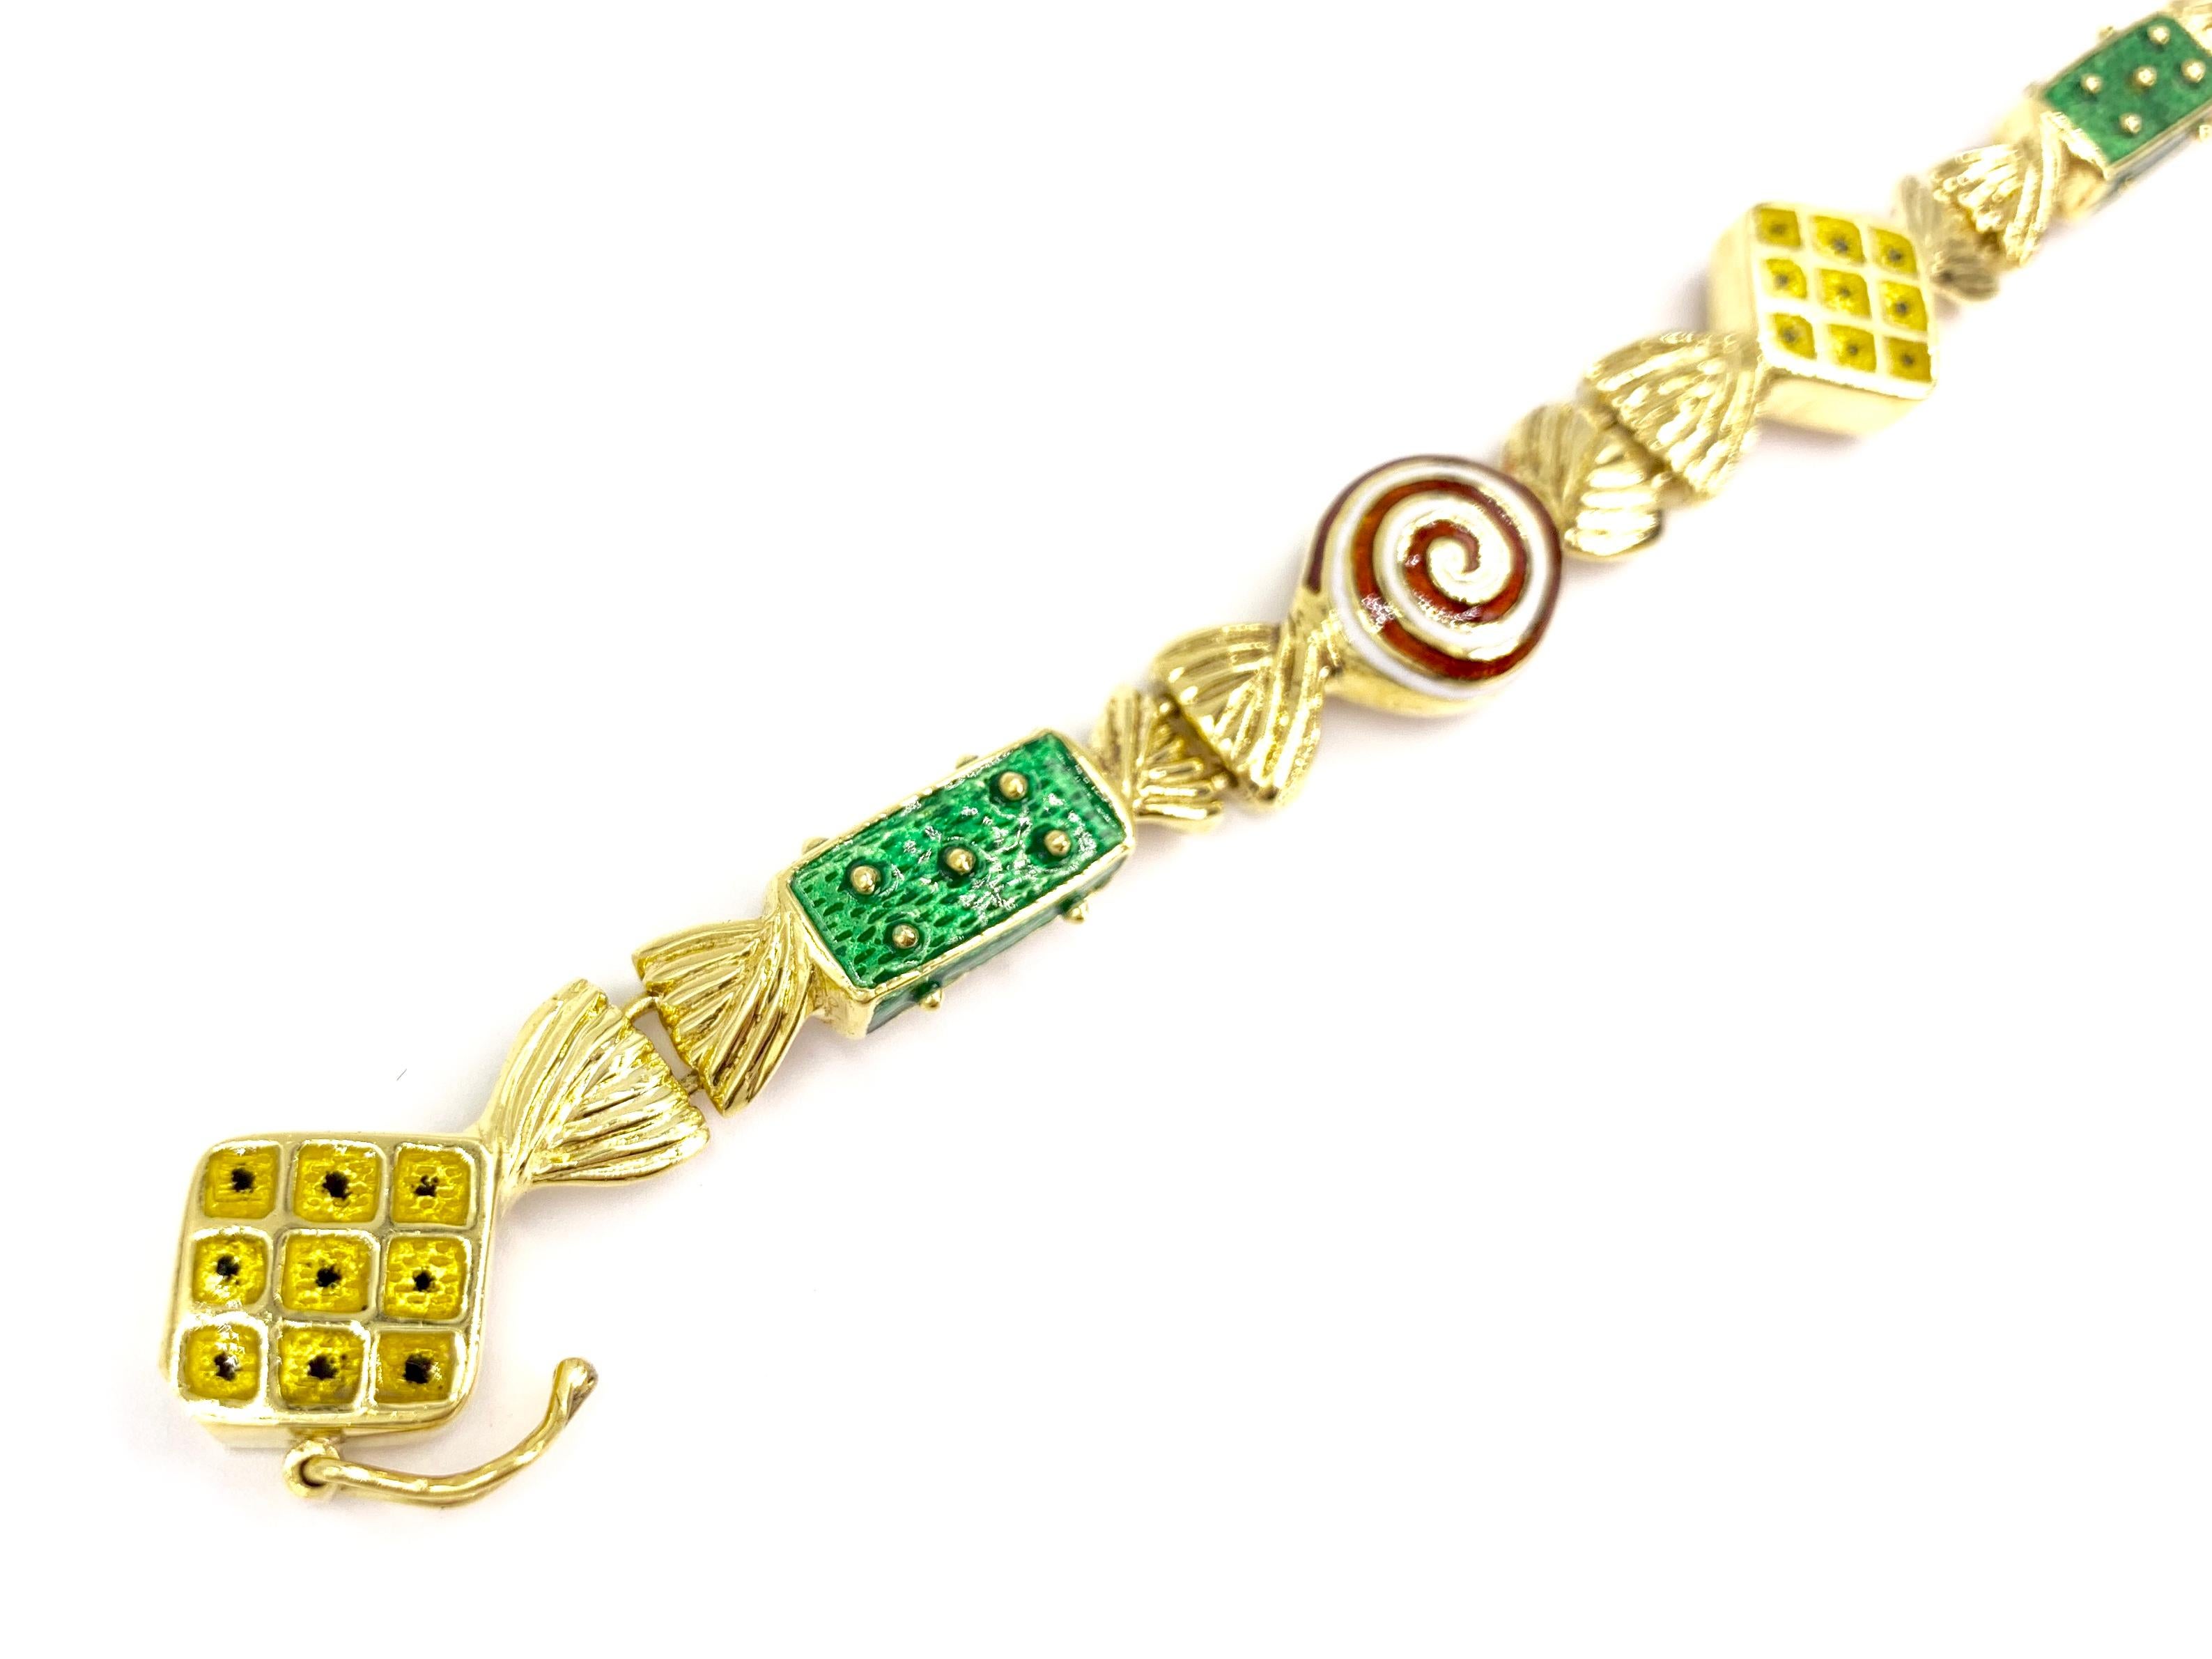 A whimsical and wearable well made 18 karat yellow gold bracelet featuring hand painted enamel hard candy design links by expert jeweler, Hidalgo. Red and white swirls, green textured and yellow patterned hard candies are made with fluted gold ends